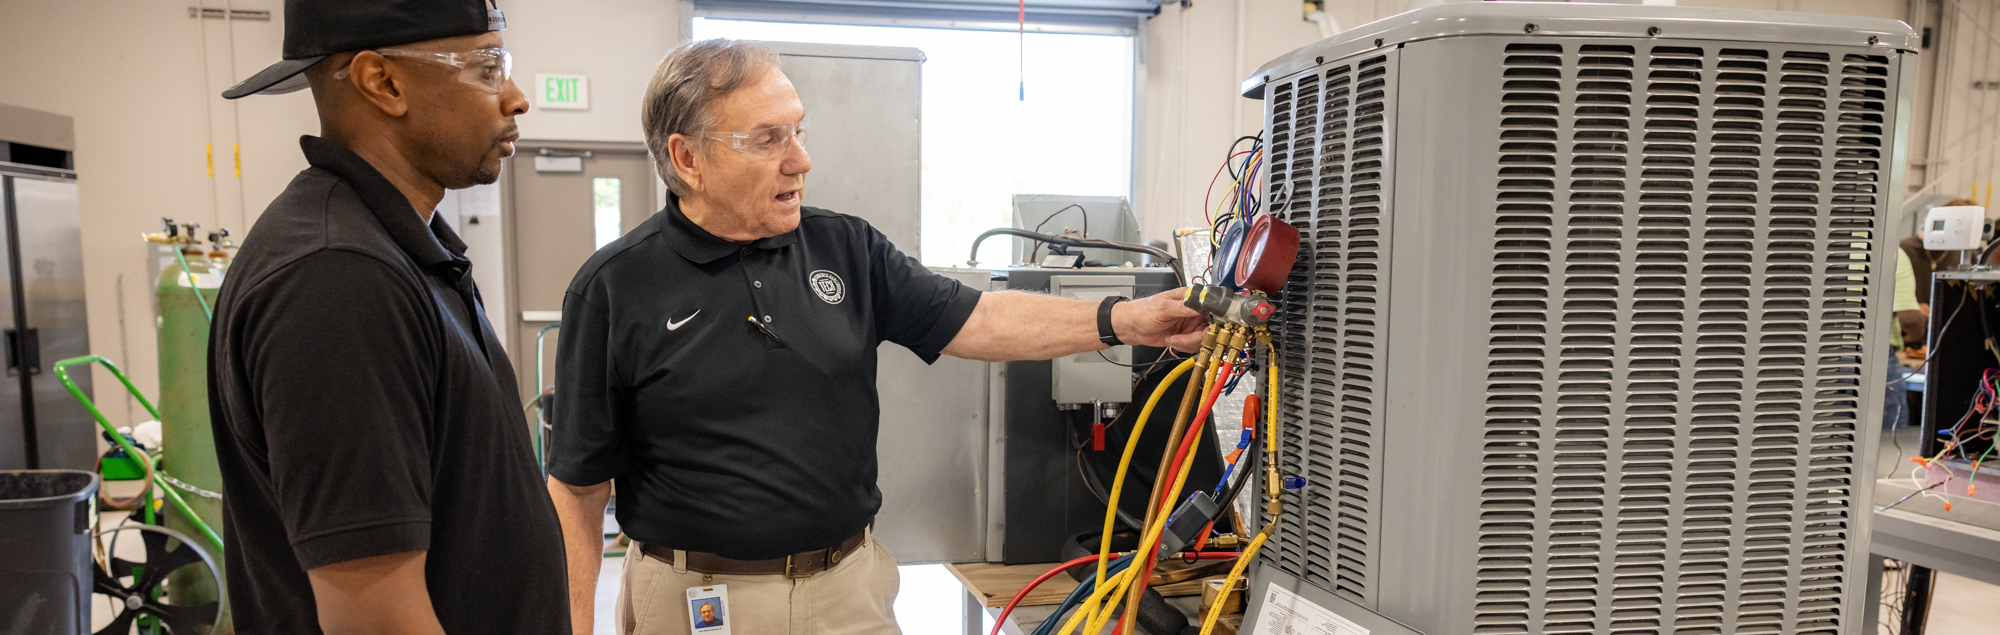 A FDTC instructor shows a HVAC student how to troubleshoot an air conditioning unit in the HVAC lab